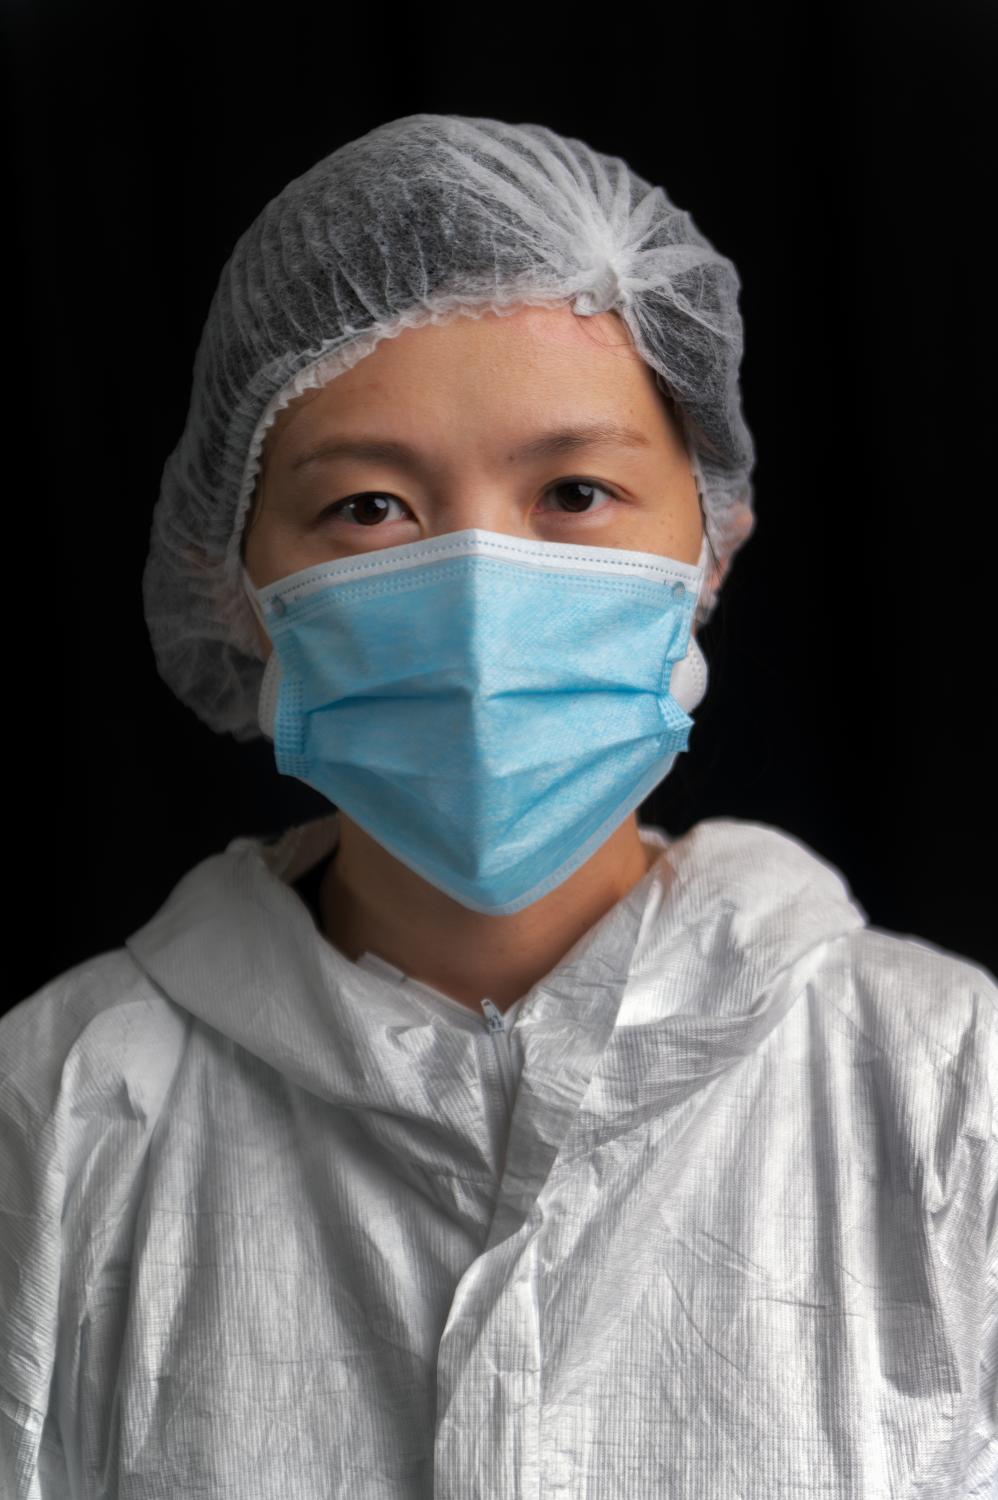 Shih-Hsis Tsai, 39, originally from Taiwan, poses for a portrait inside the COVID unit at Clove...